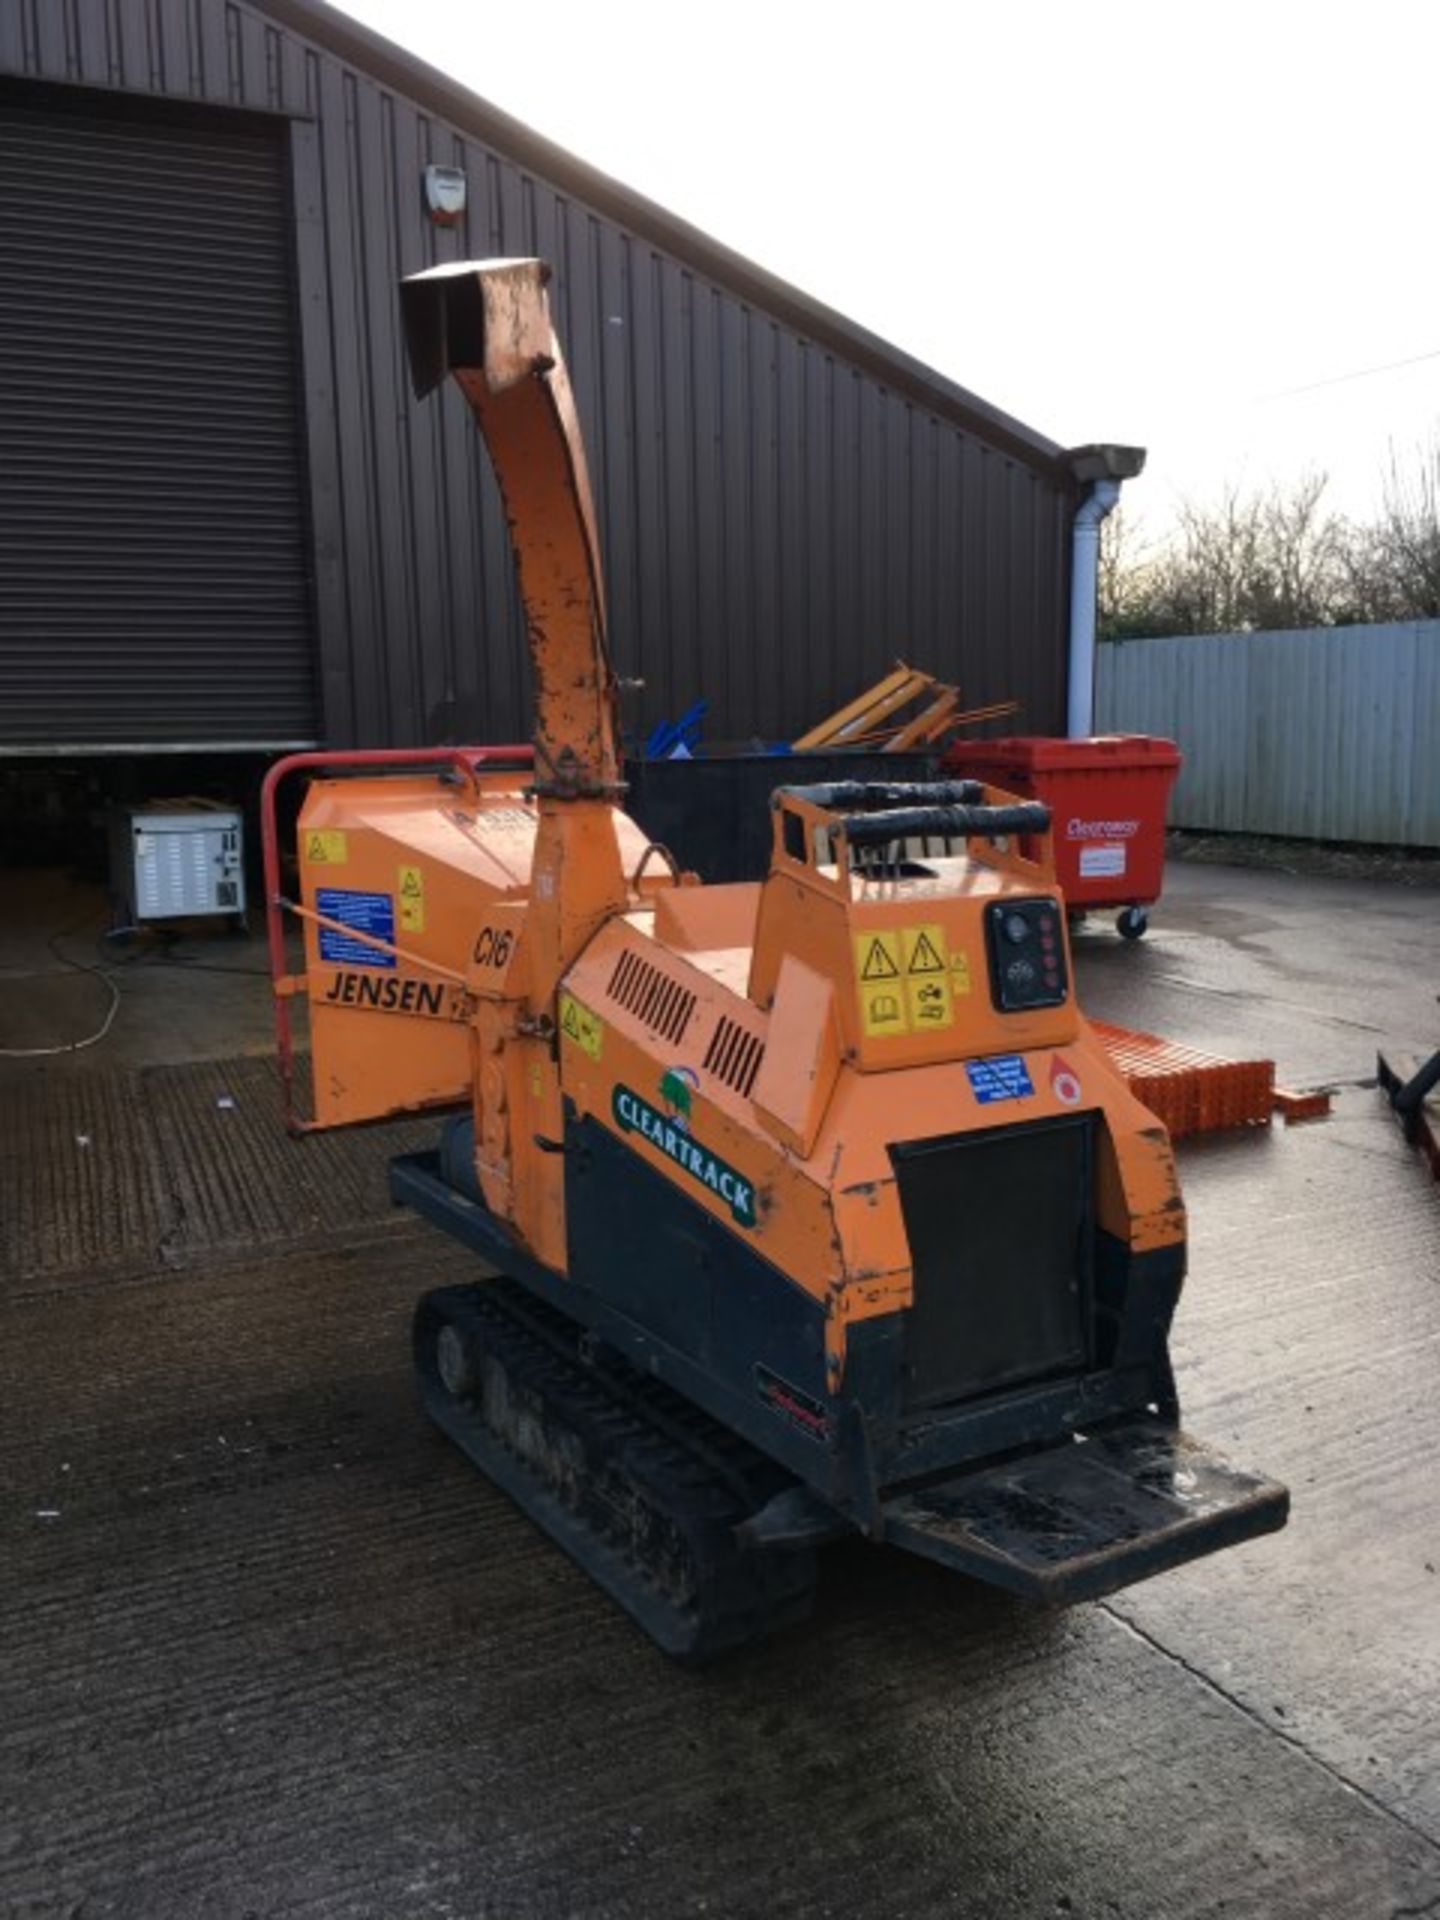 Jensen 141Z doubletracked woodchipper, Serial No: 11030235645, Indicated Hours: 1100Lot located at: